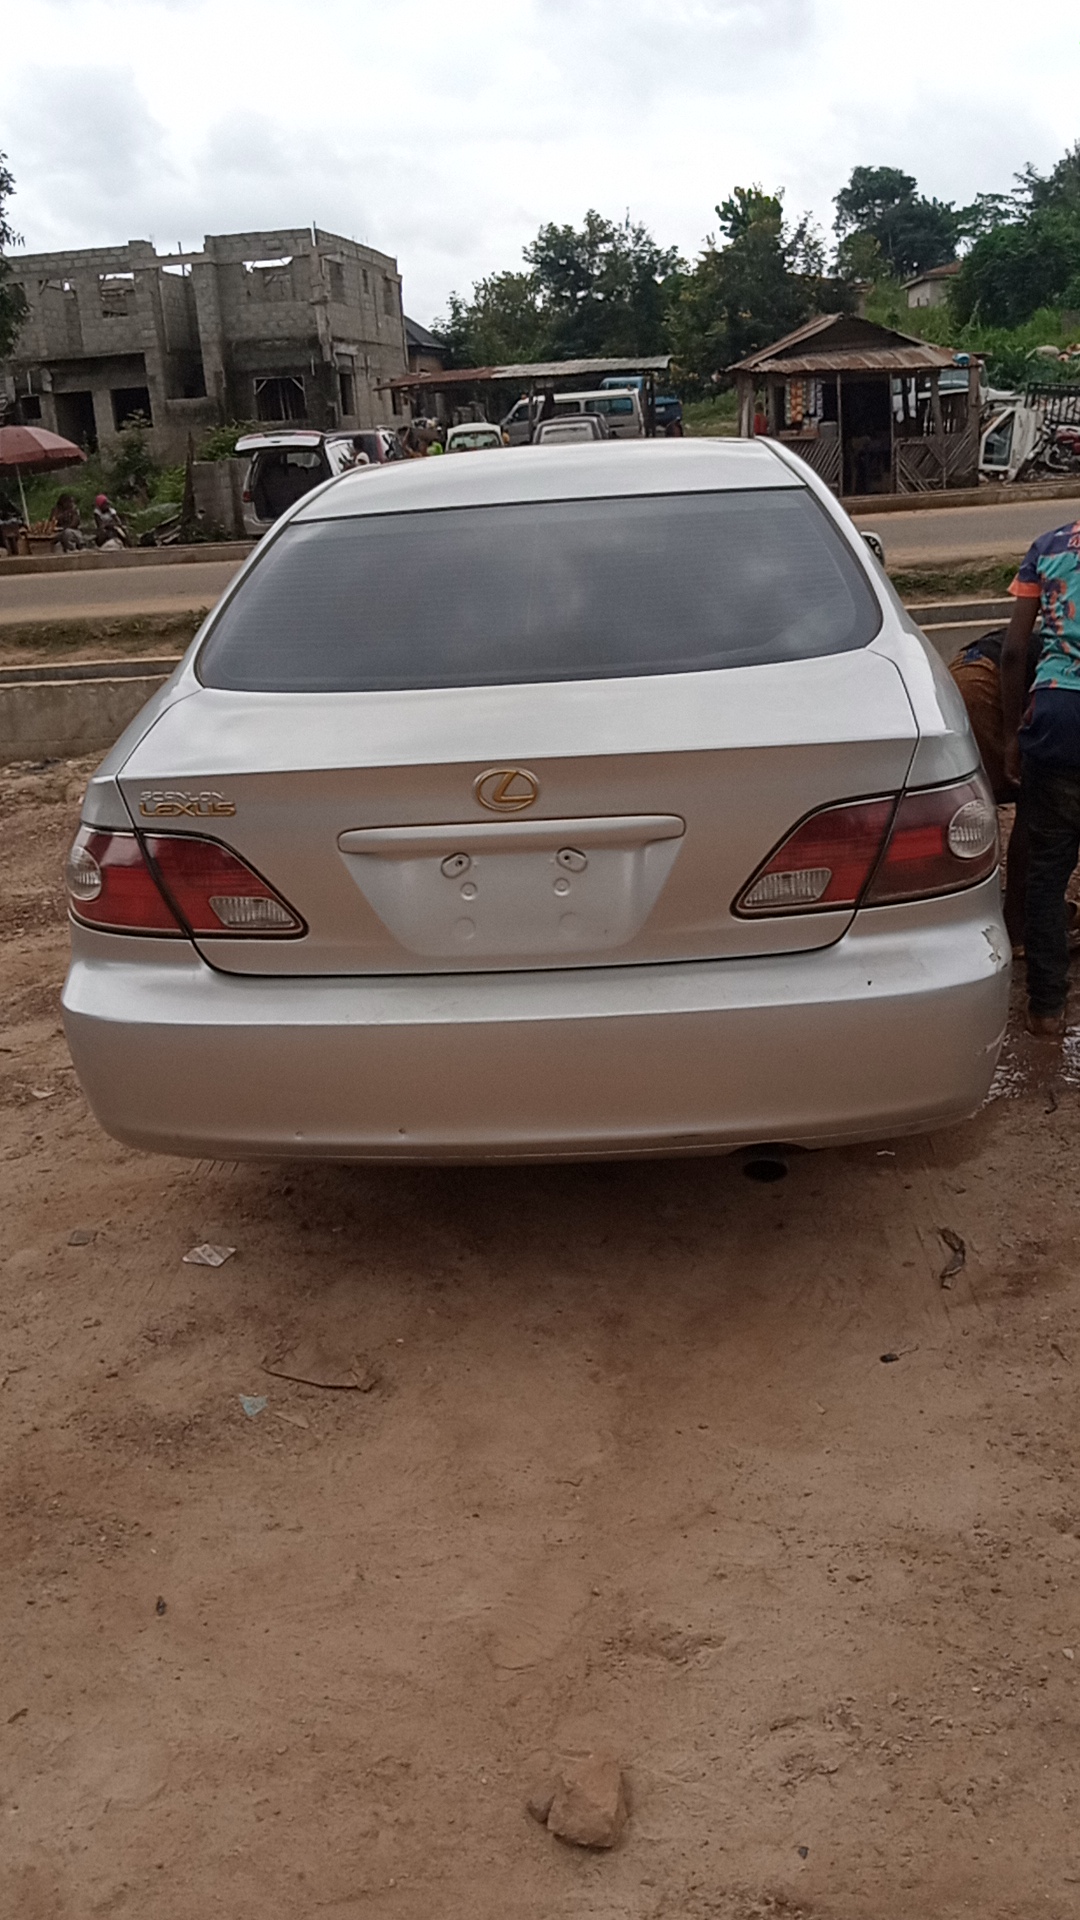 Lexus ES300 is available at Efritin